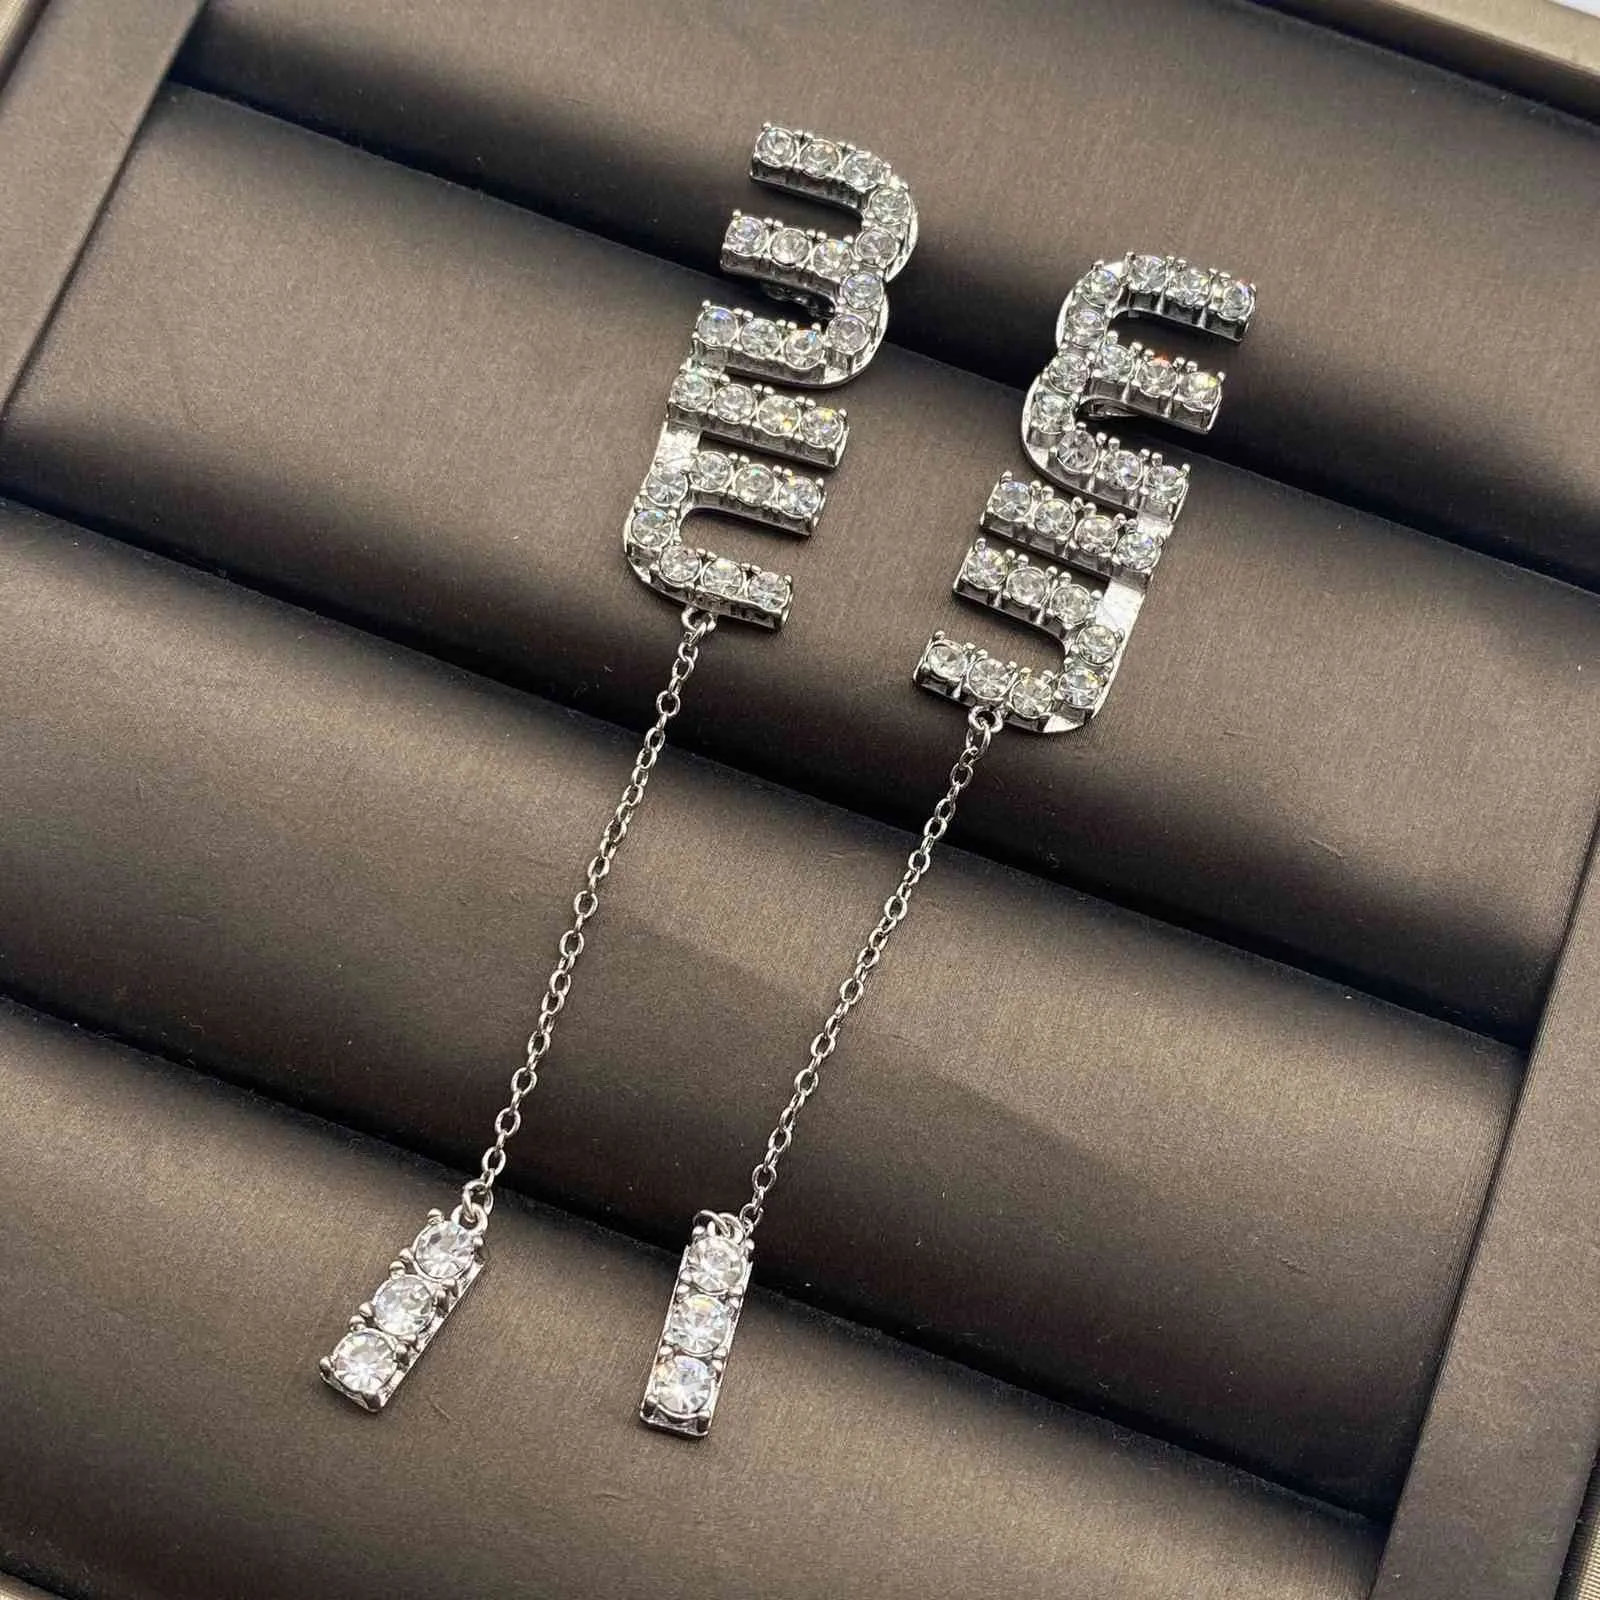 Design jewelry Miao new crystal letter necklace fashionable personality fashion clavicle chain with Rhinestone Earrings Bracelet f7925415